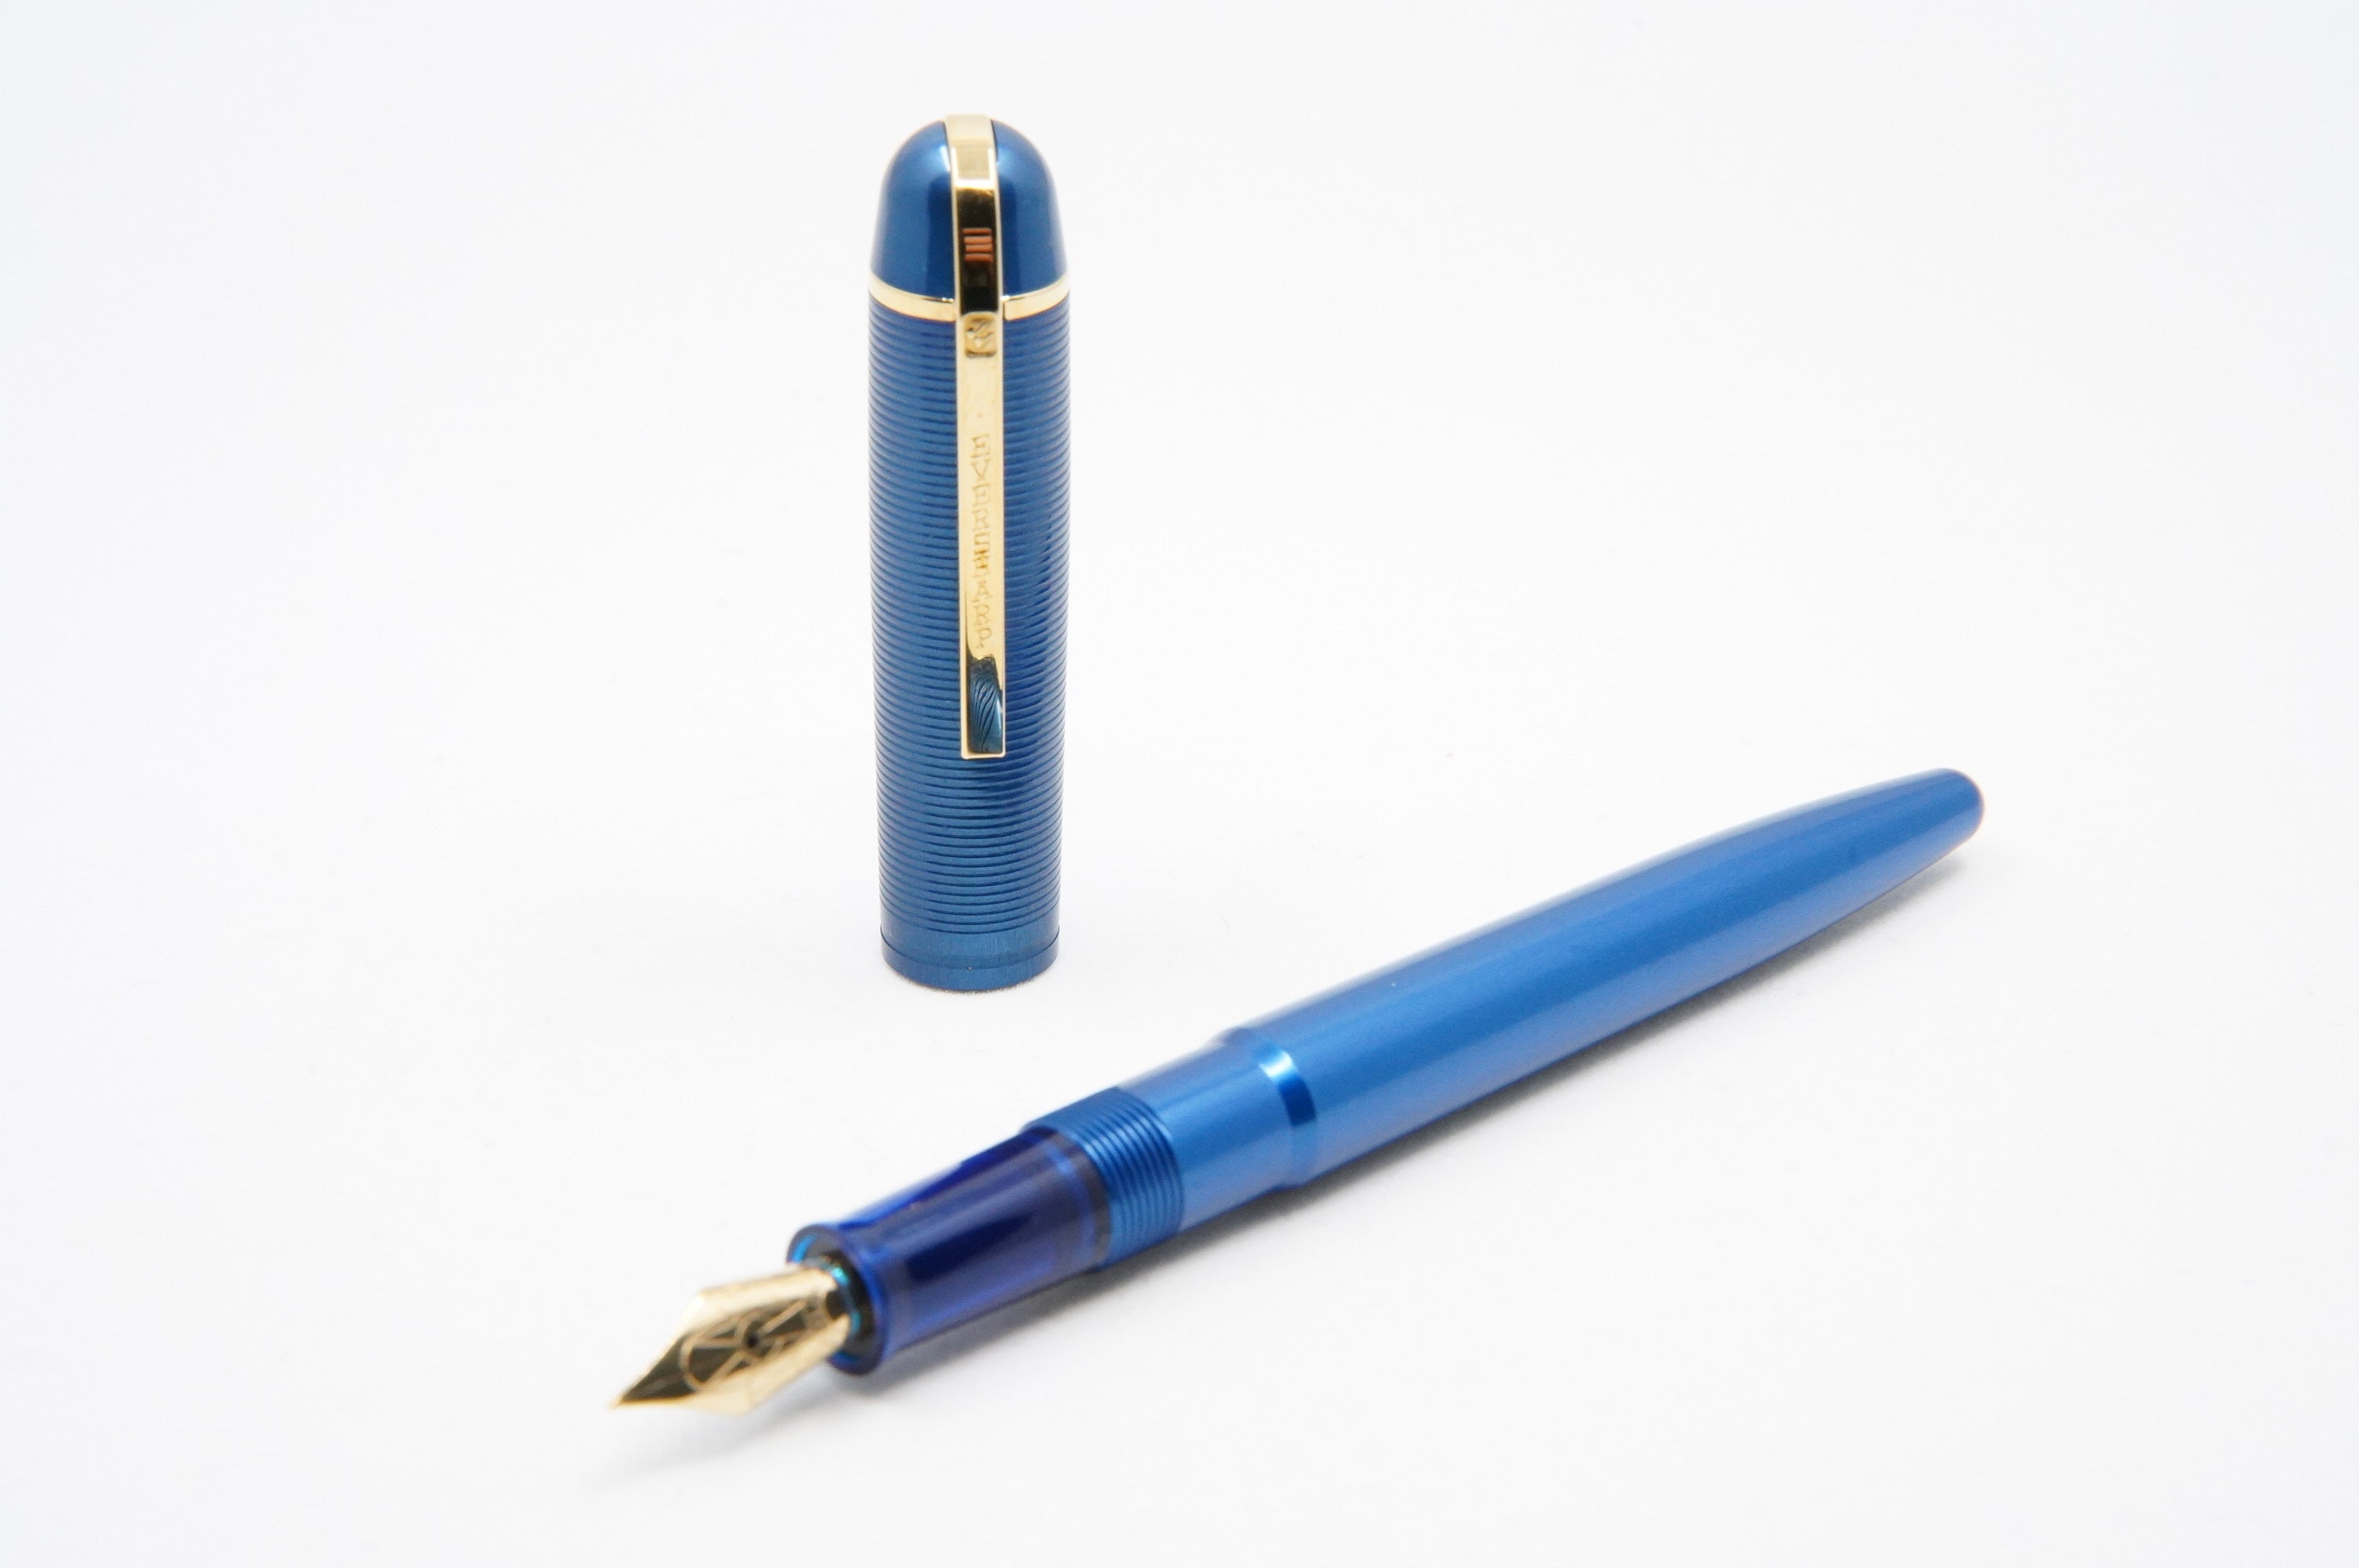 Wahl Eversharp Skyline FP Aluminum Blue - The iconic SKYLINE created by Henry Dreyfus in 1939